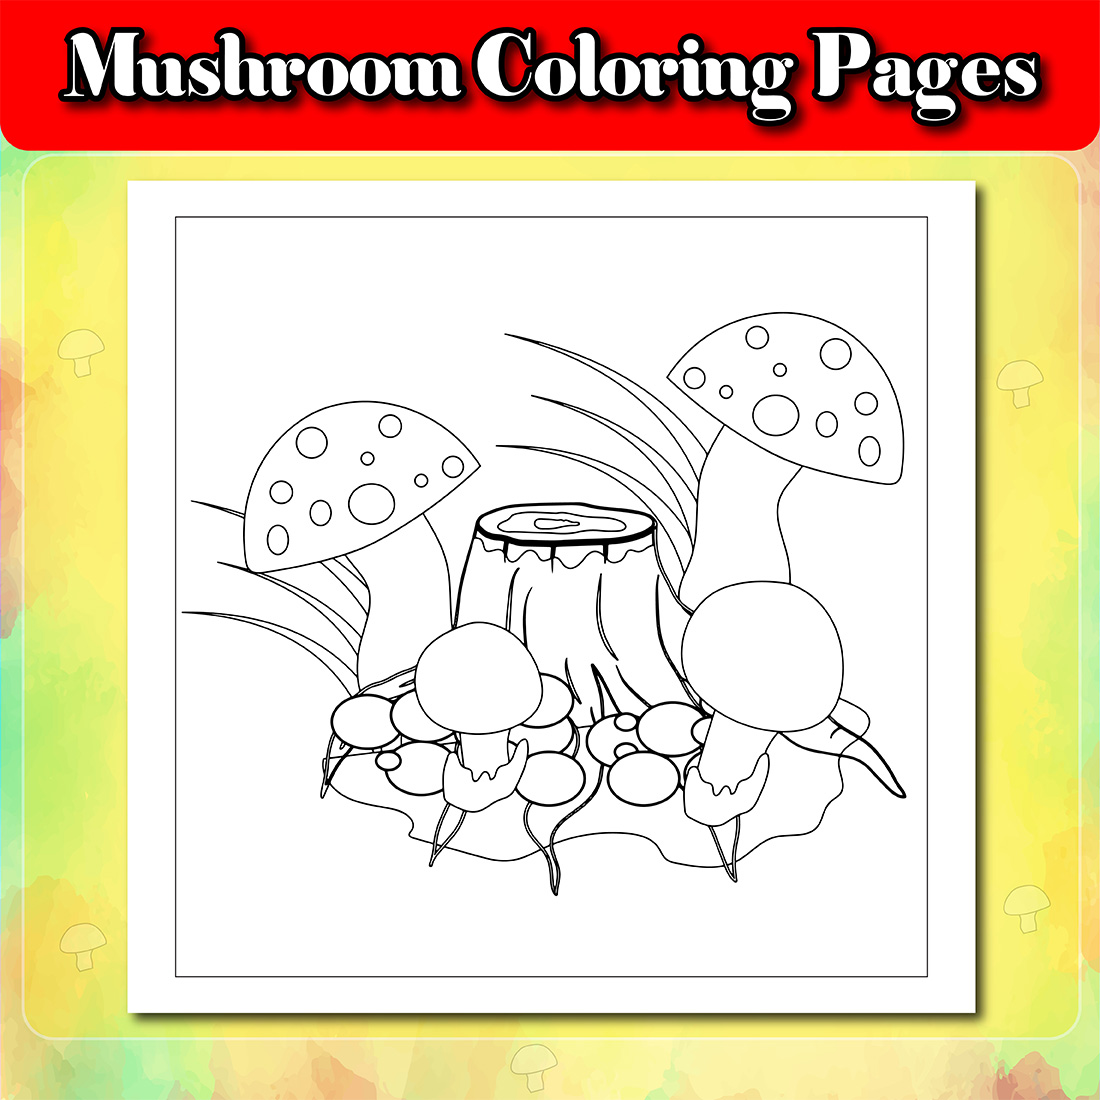 Mushroom Coloring Pages.